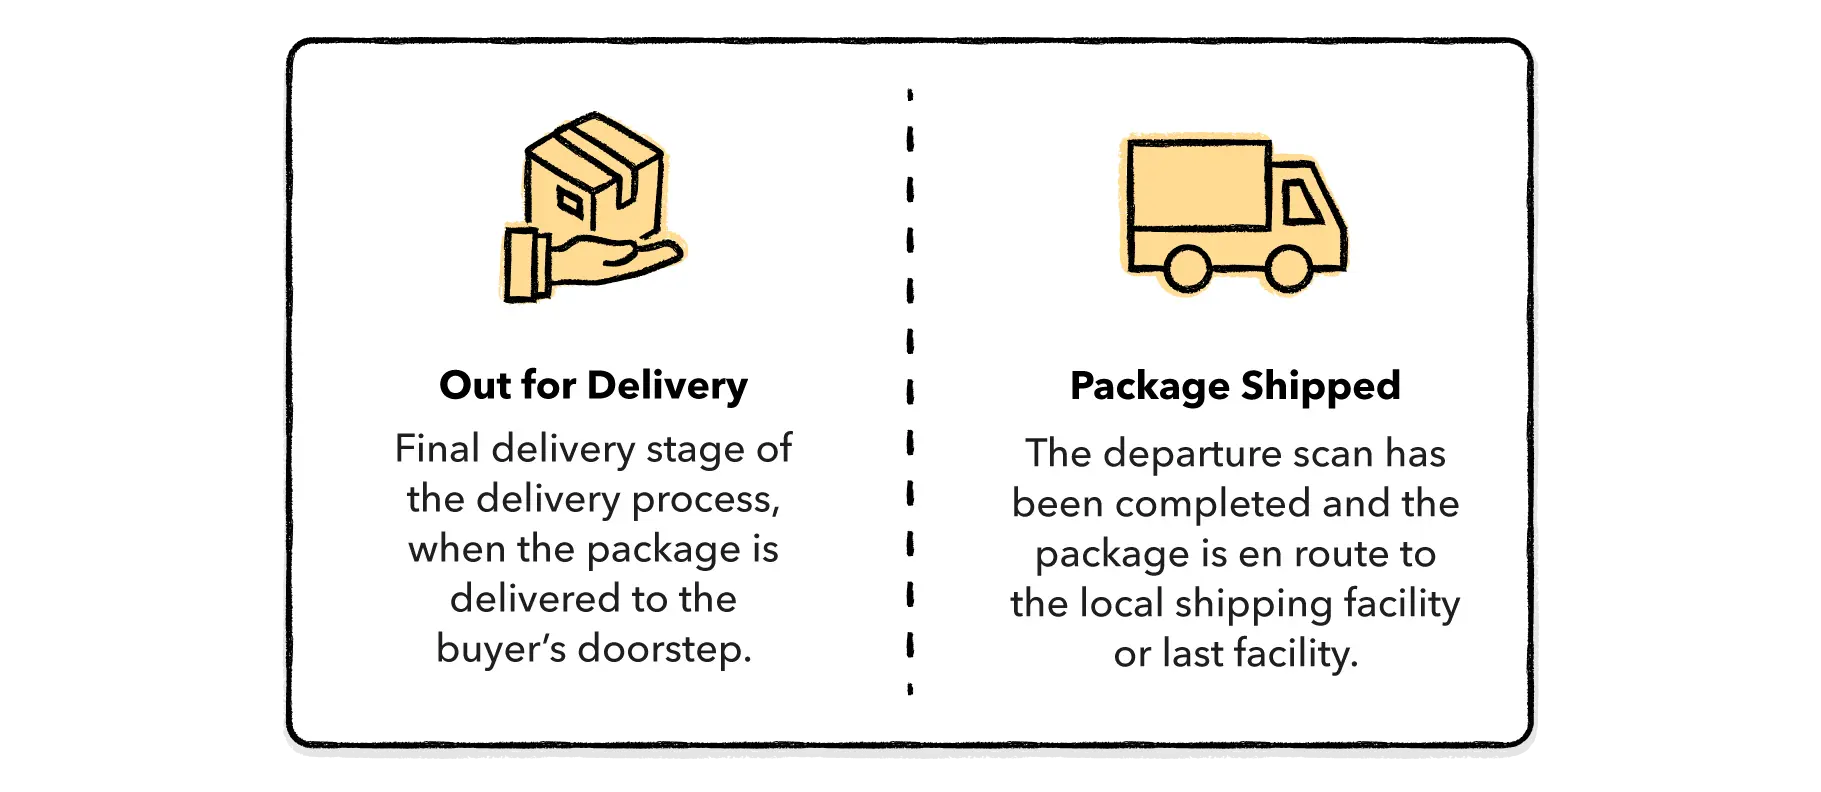 out for delivery and package shipped comparison